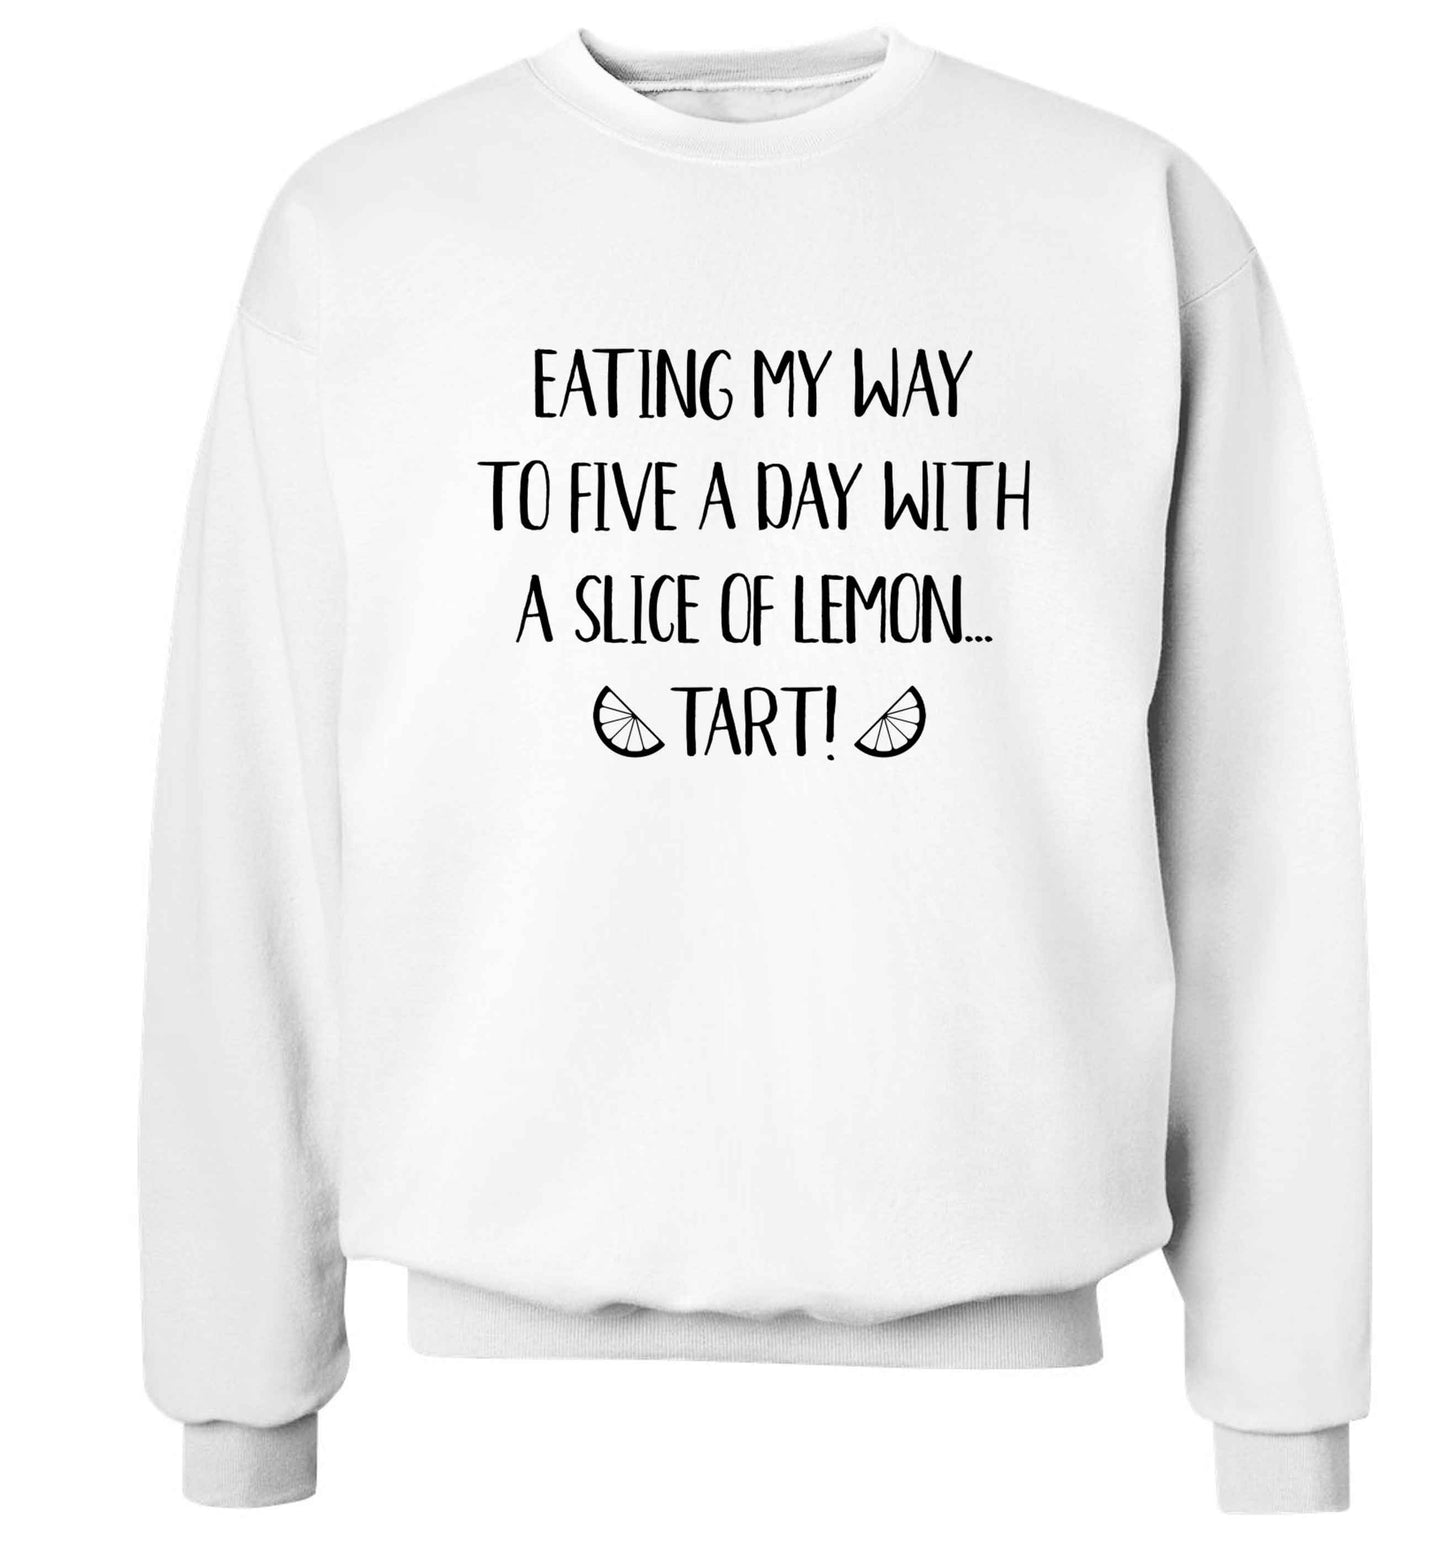 Eating my way to five a day with a slice of lemon tart Adult's unisex white Sweater 2XL